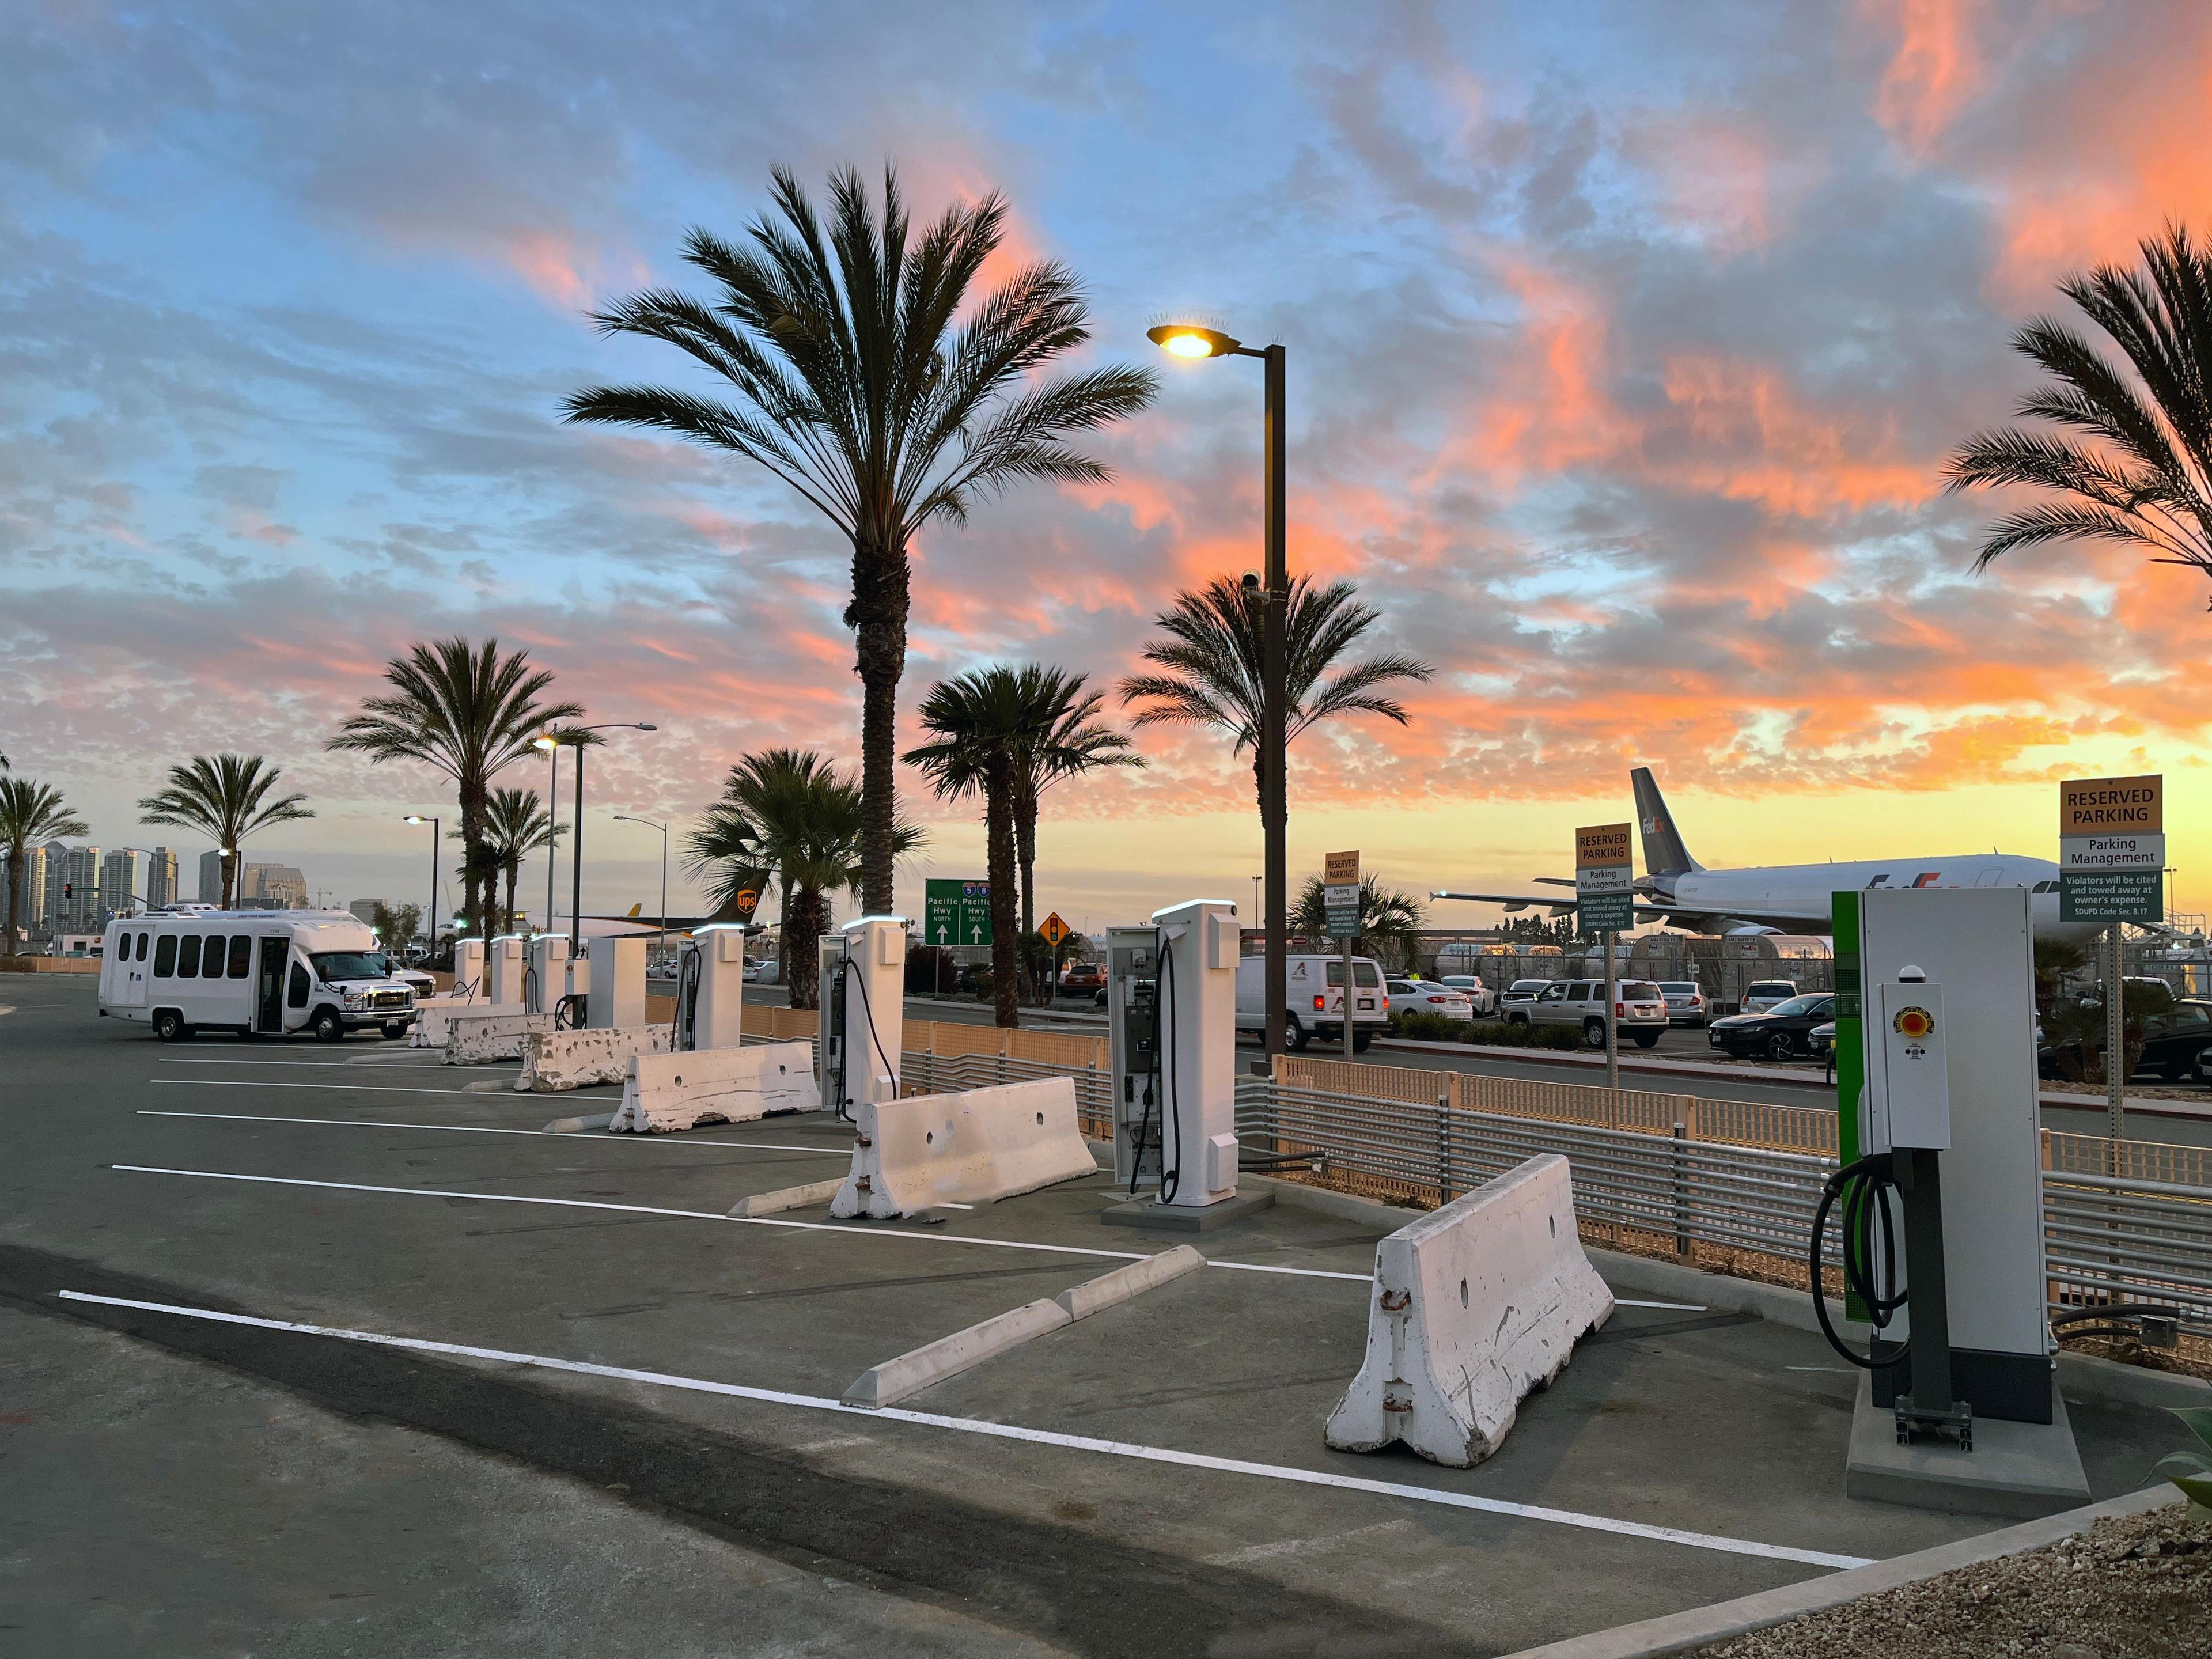 ACE Parking Charing stations at the San Diego Air Port